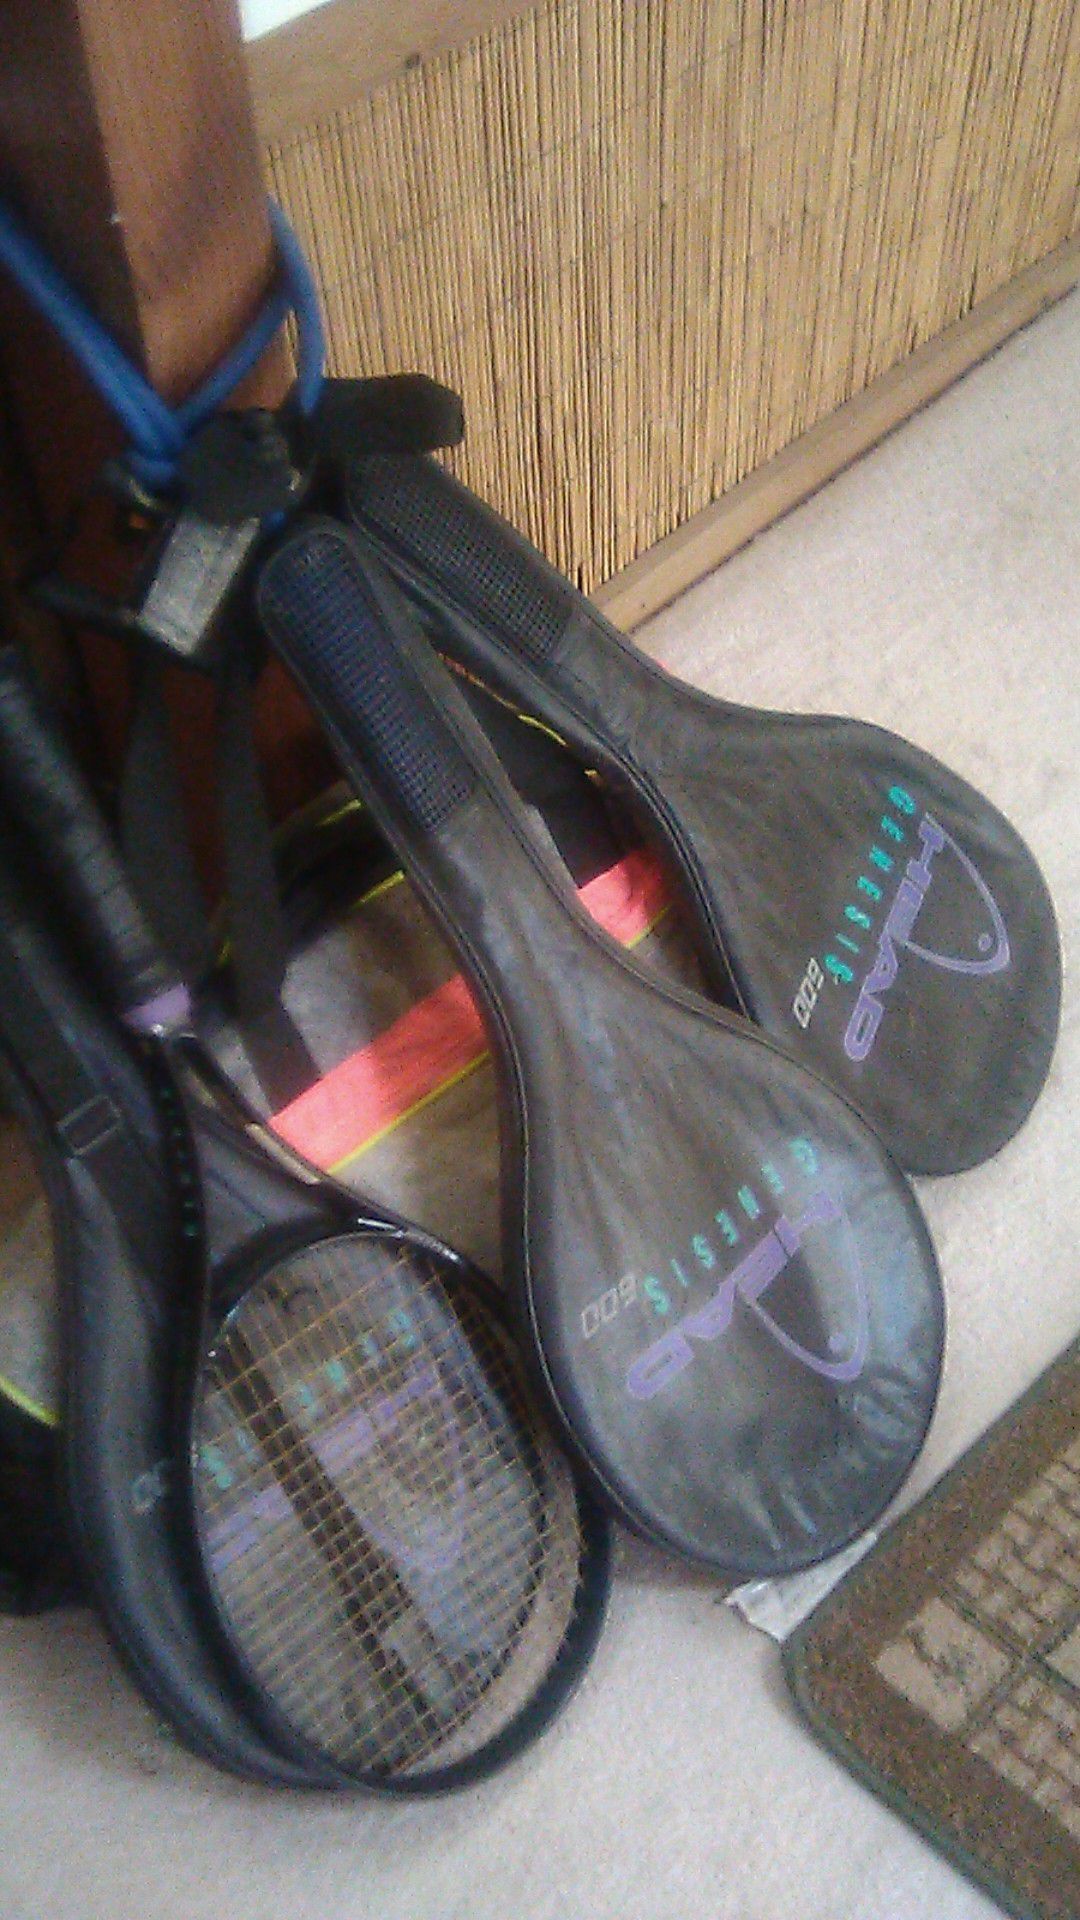 Two "Head Genesis" tennis rackets and ike travel carrying bag